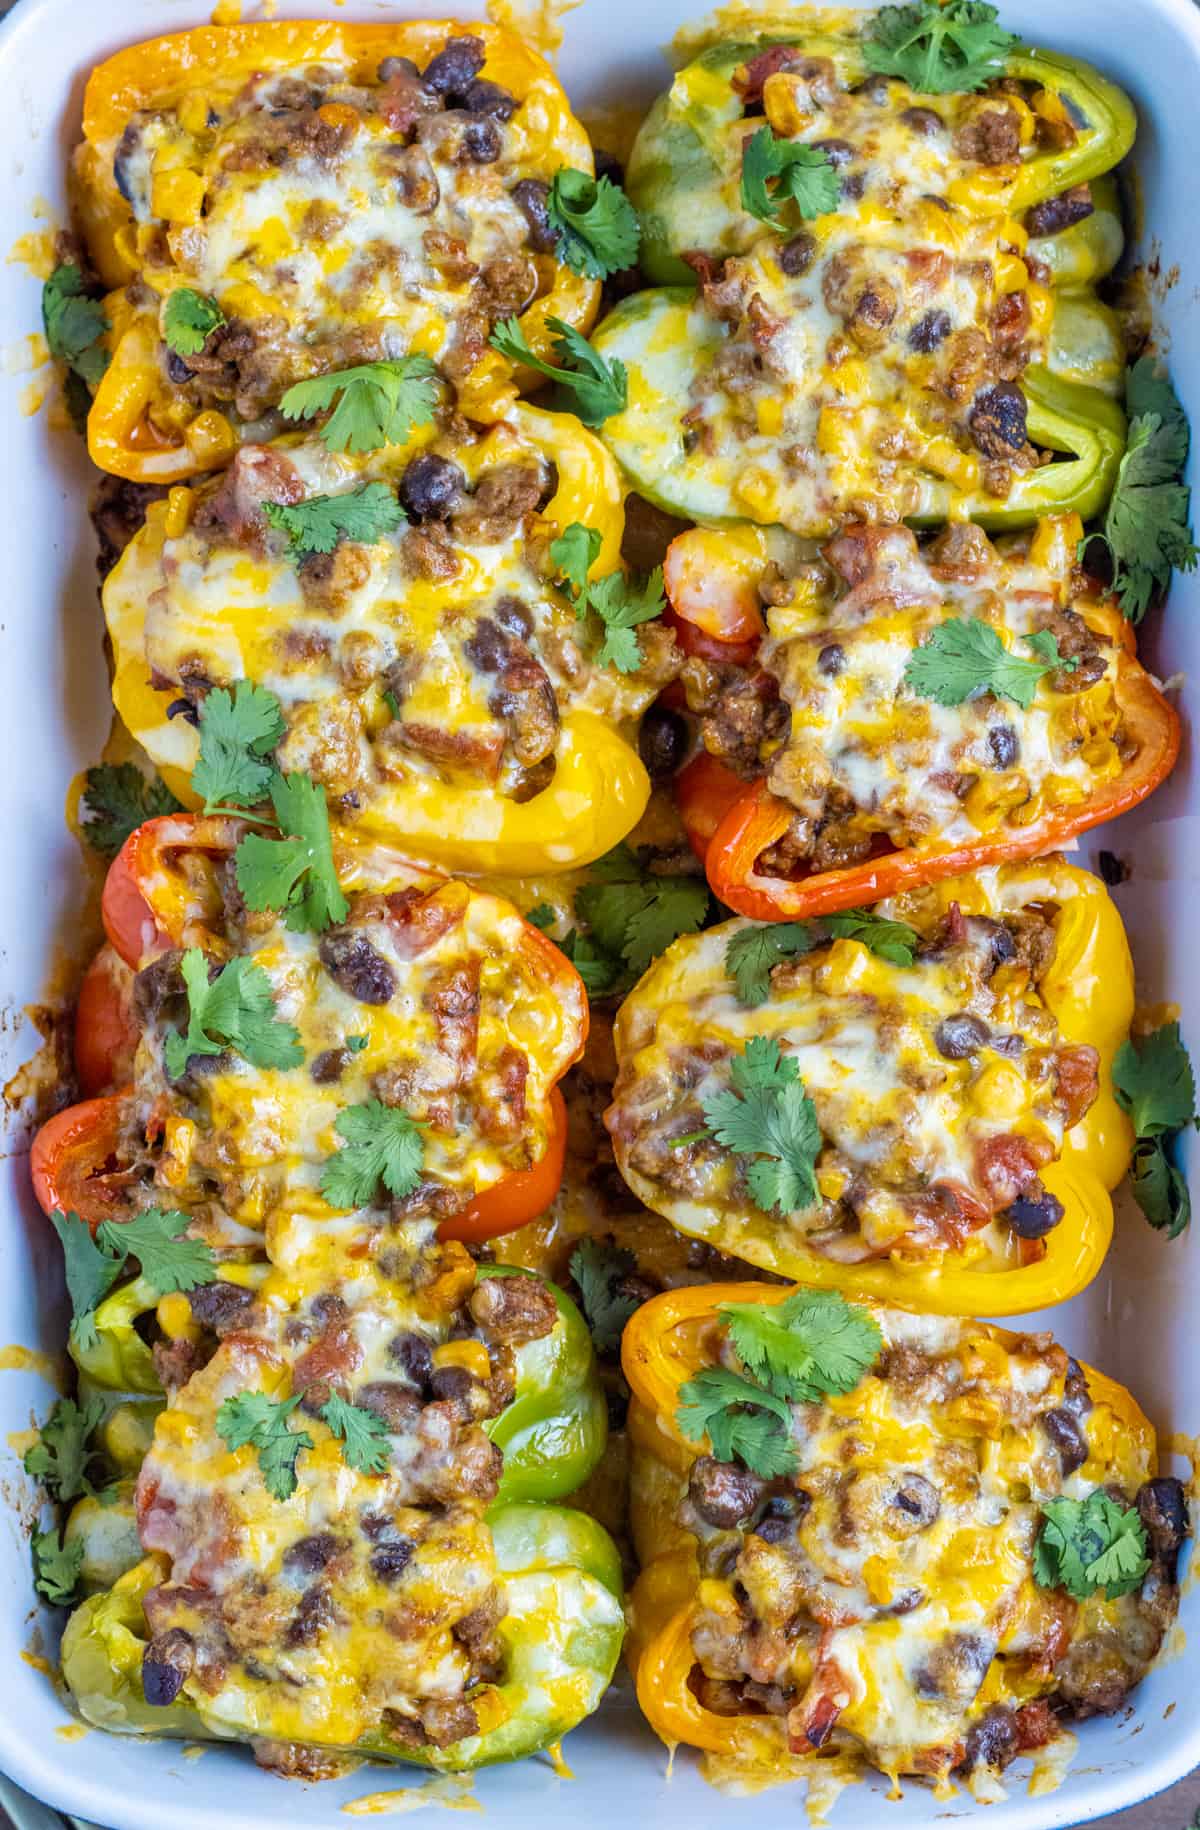 Eight taco stuffed peppers in a baking dish.